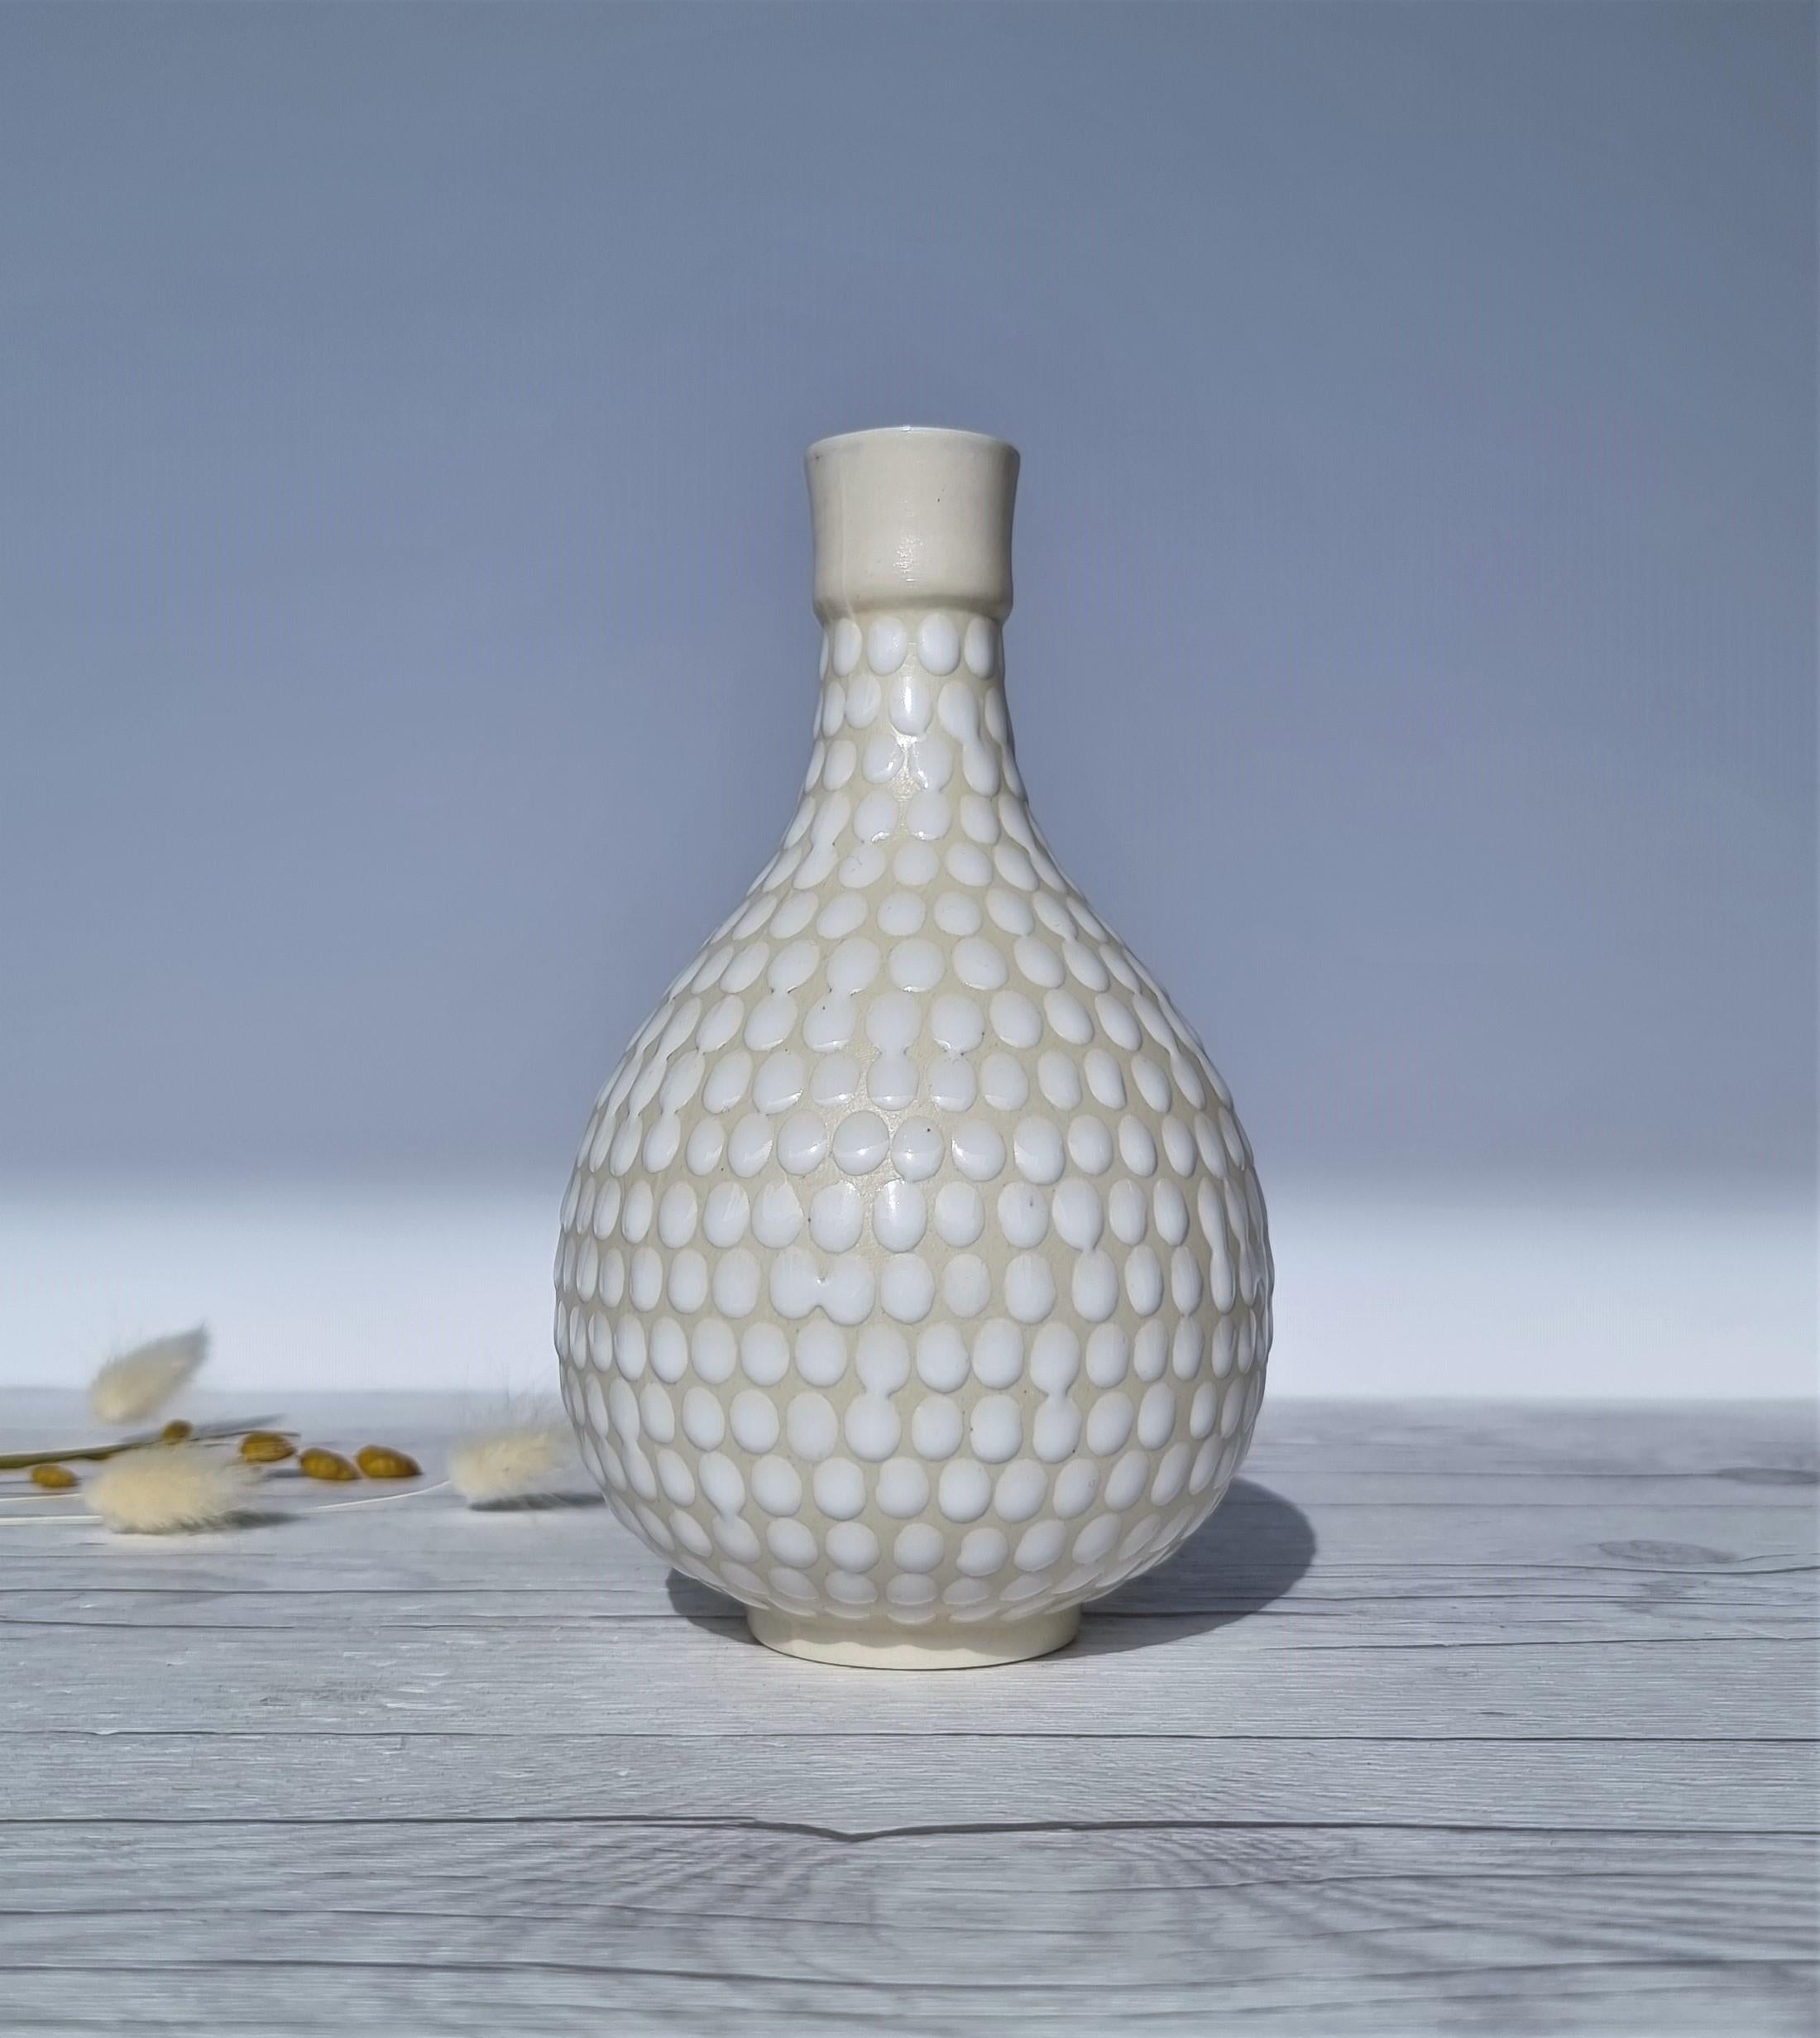 This work of beautifully understated elegance is of Scandinavian mid-century design and by Upsala Ekeby's renowned artistic director, Arthur Percy (b.1886 - d. 1976). In this piece, Percy combines the gentle curves of the classic bottle flask form